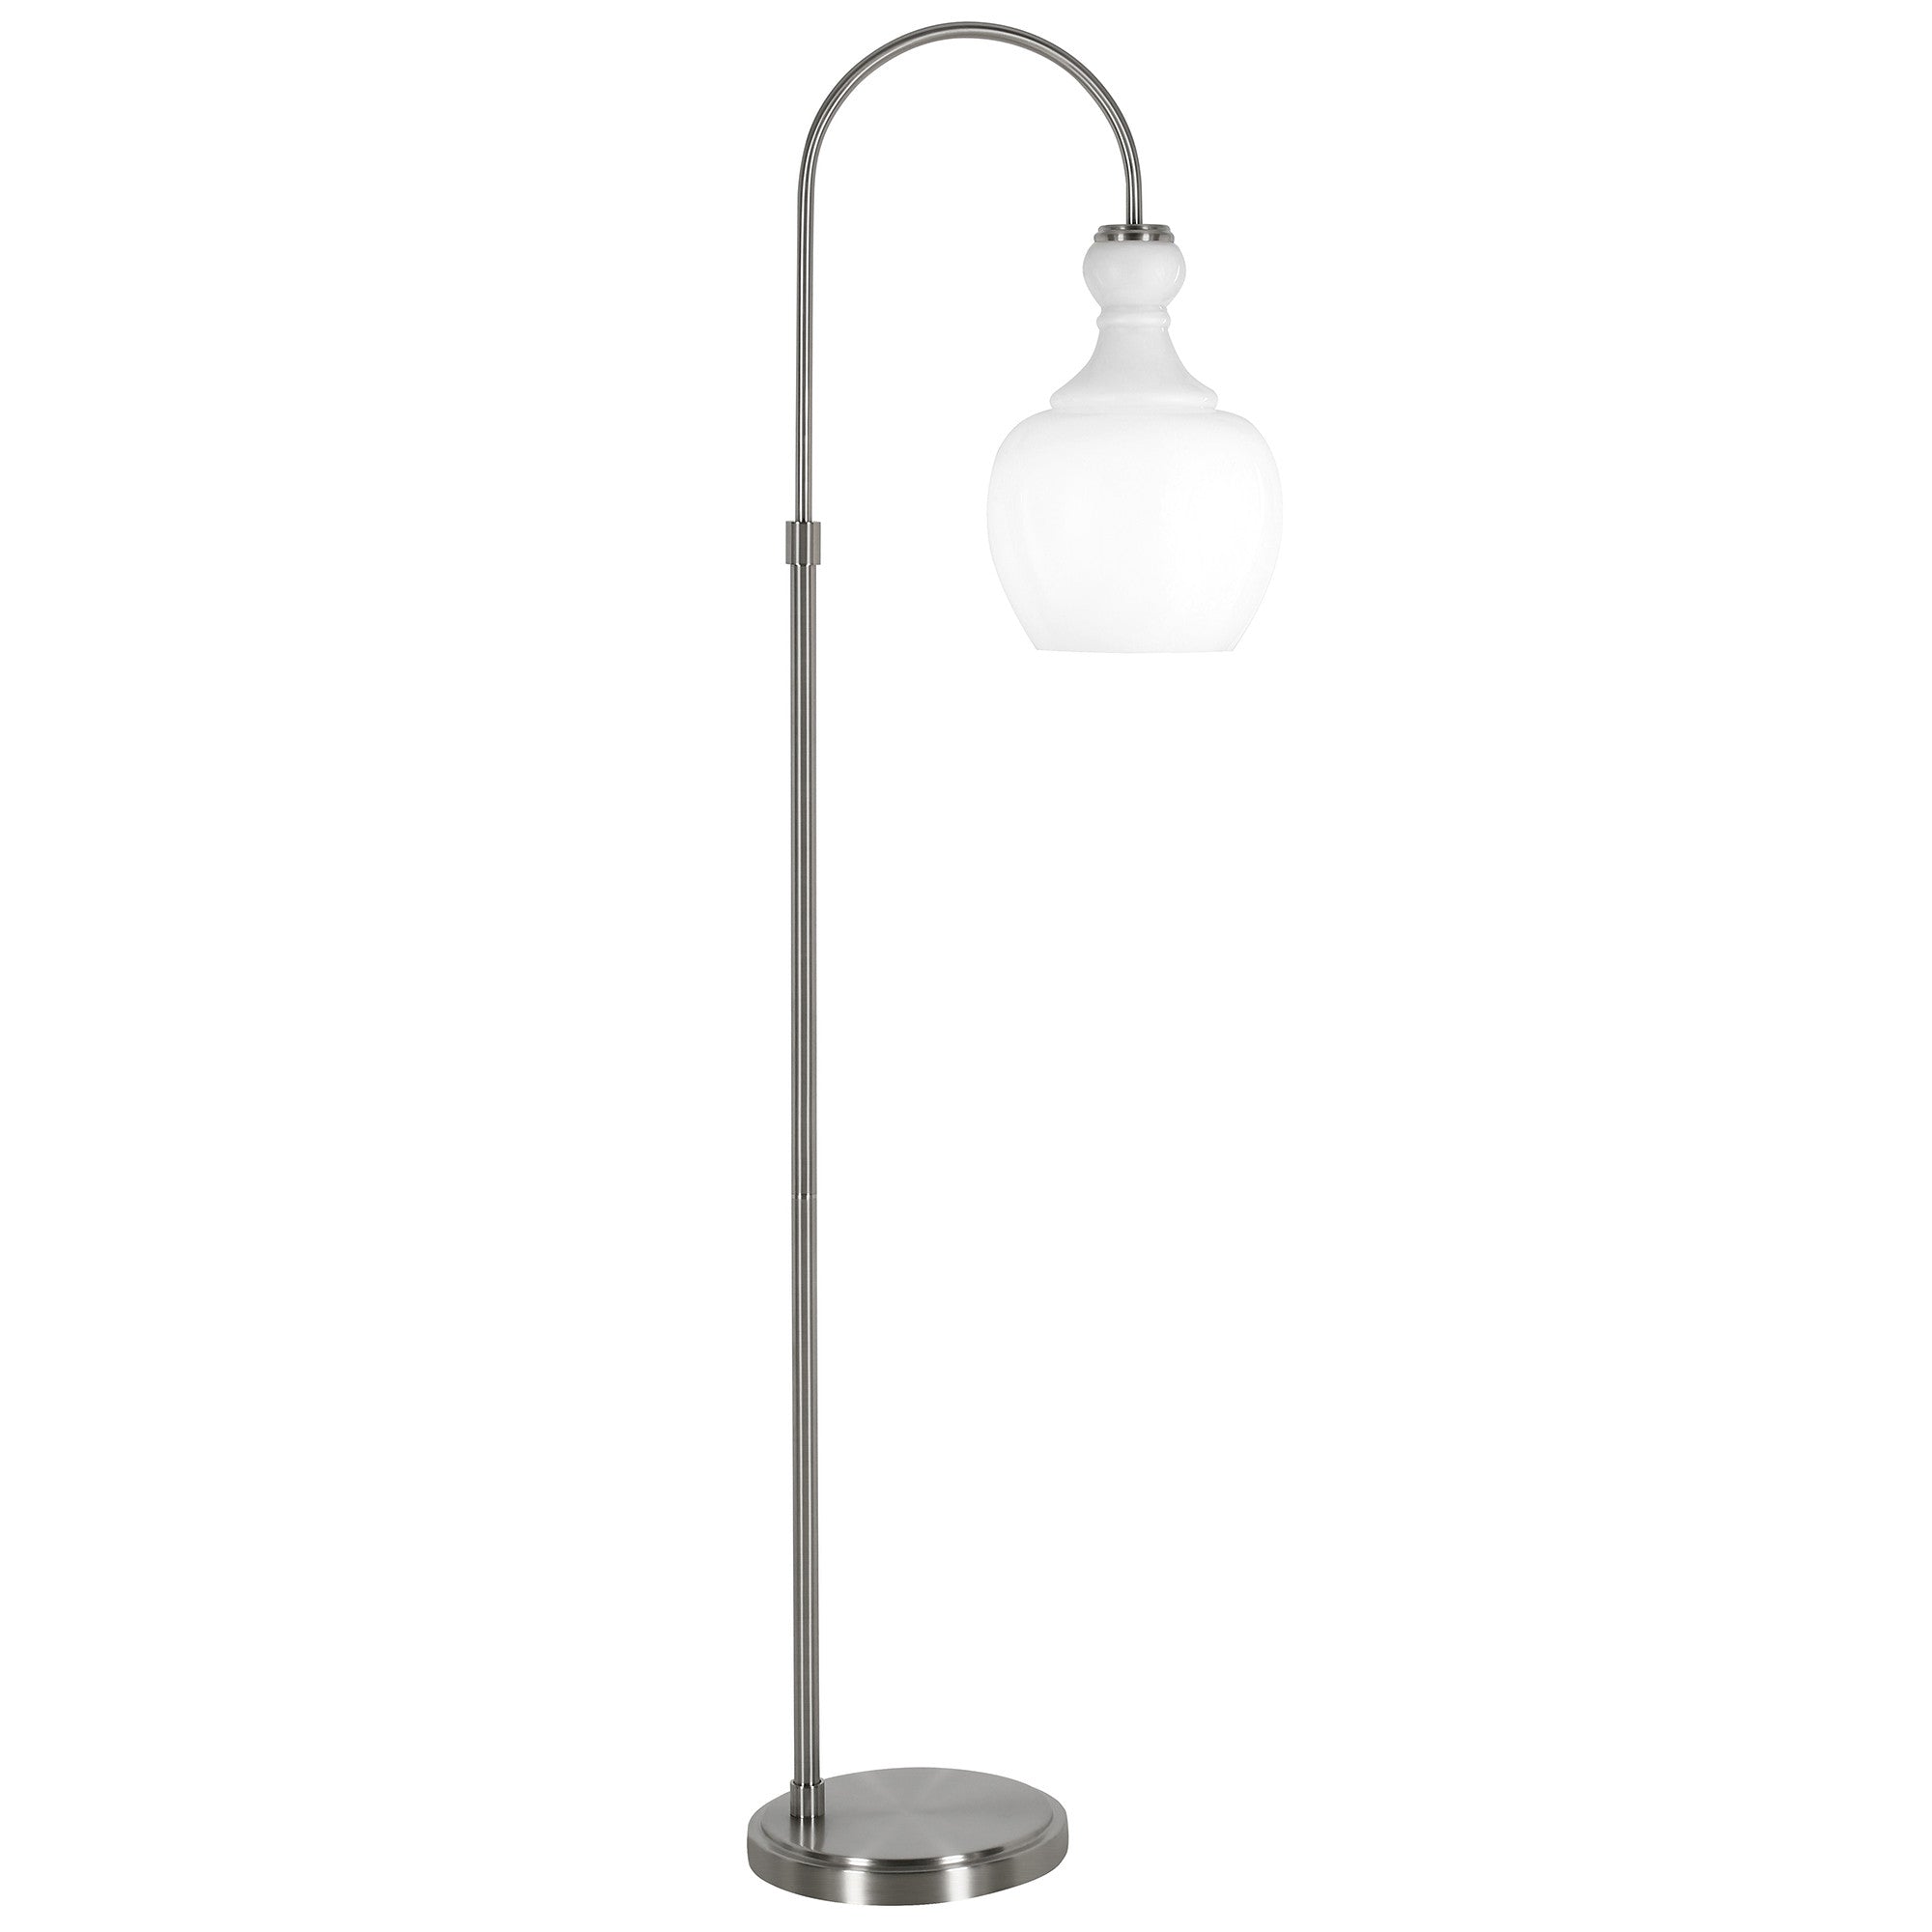 70" Nickel Arched Floor Lamp With White Frosted Glass Dome Shade